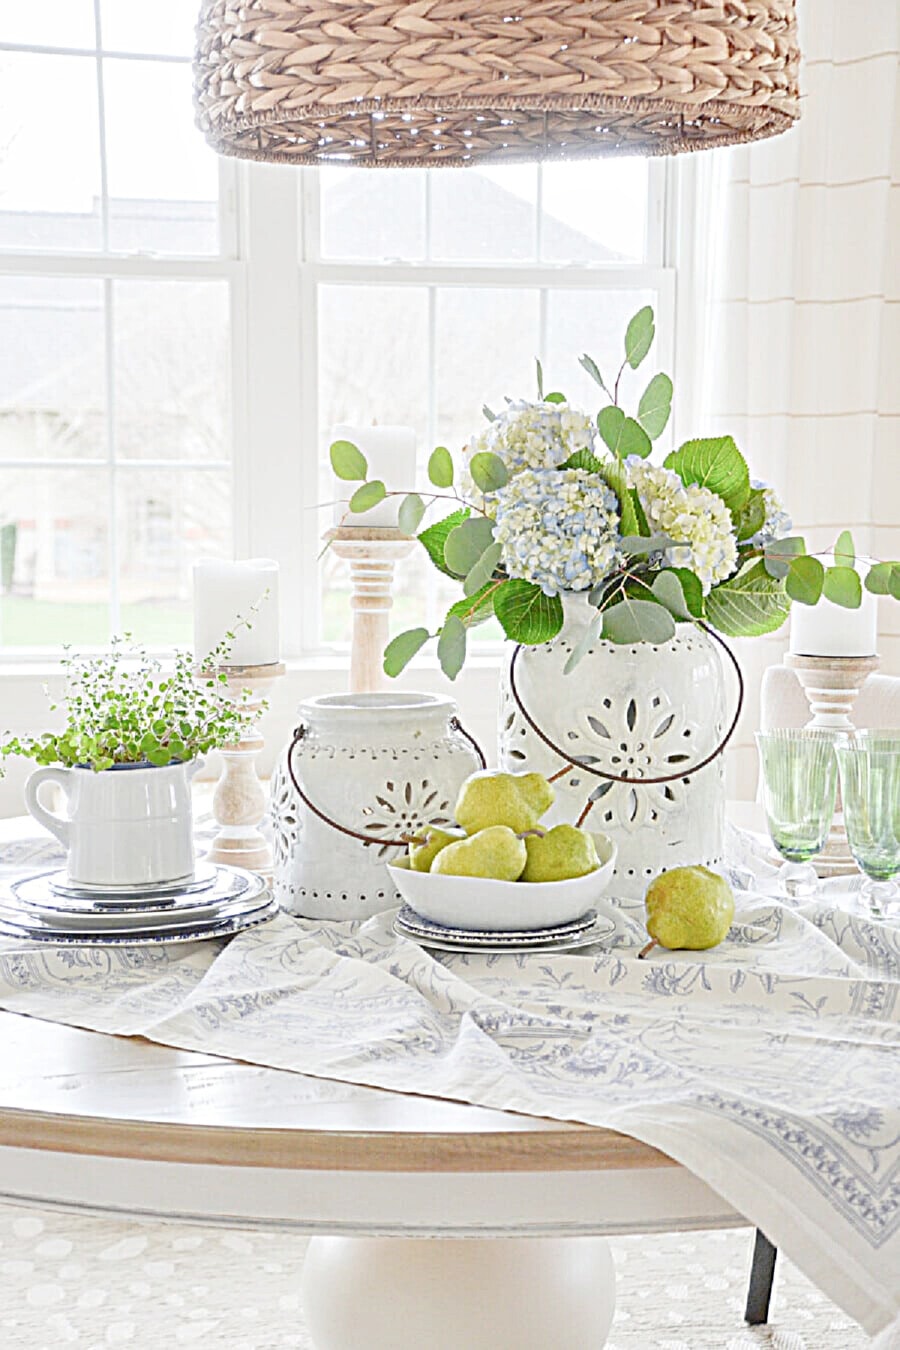 Keep Hydrangeas From Wilting, Historic House Tour, Patio Decor, Planters, and a New Kitchen